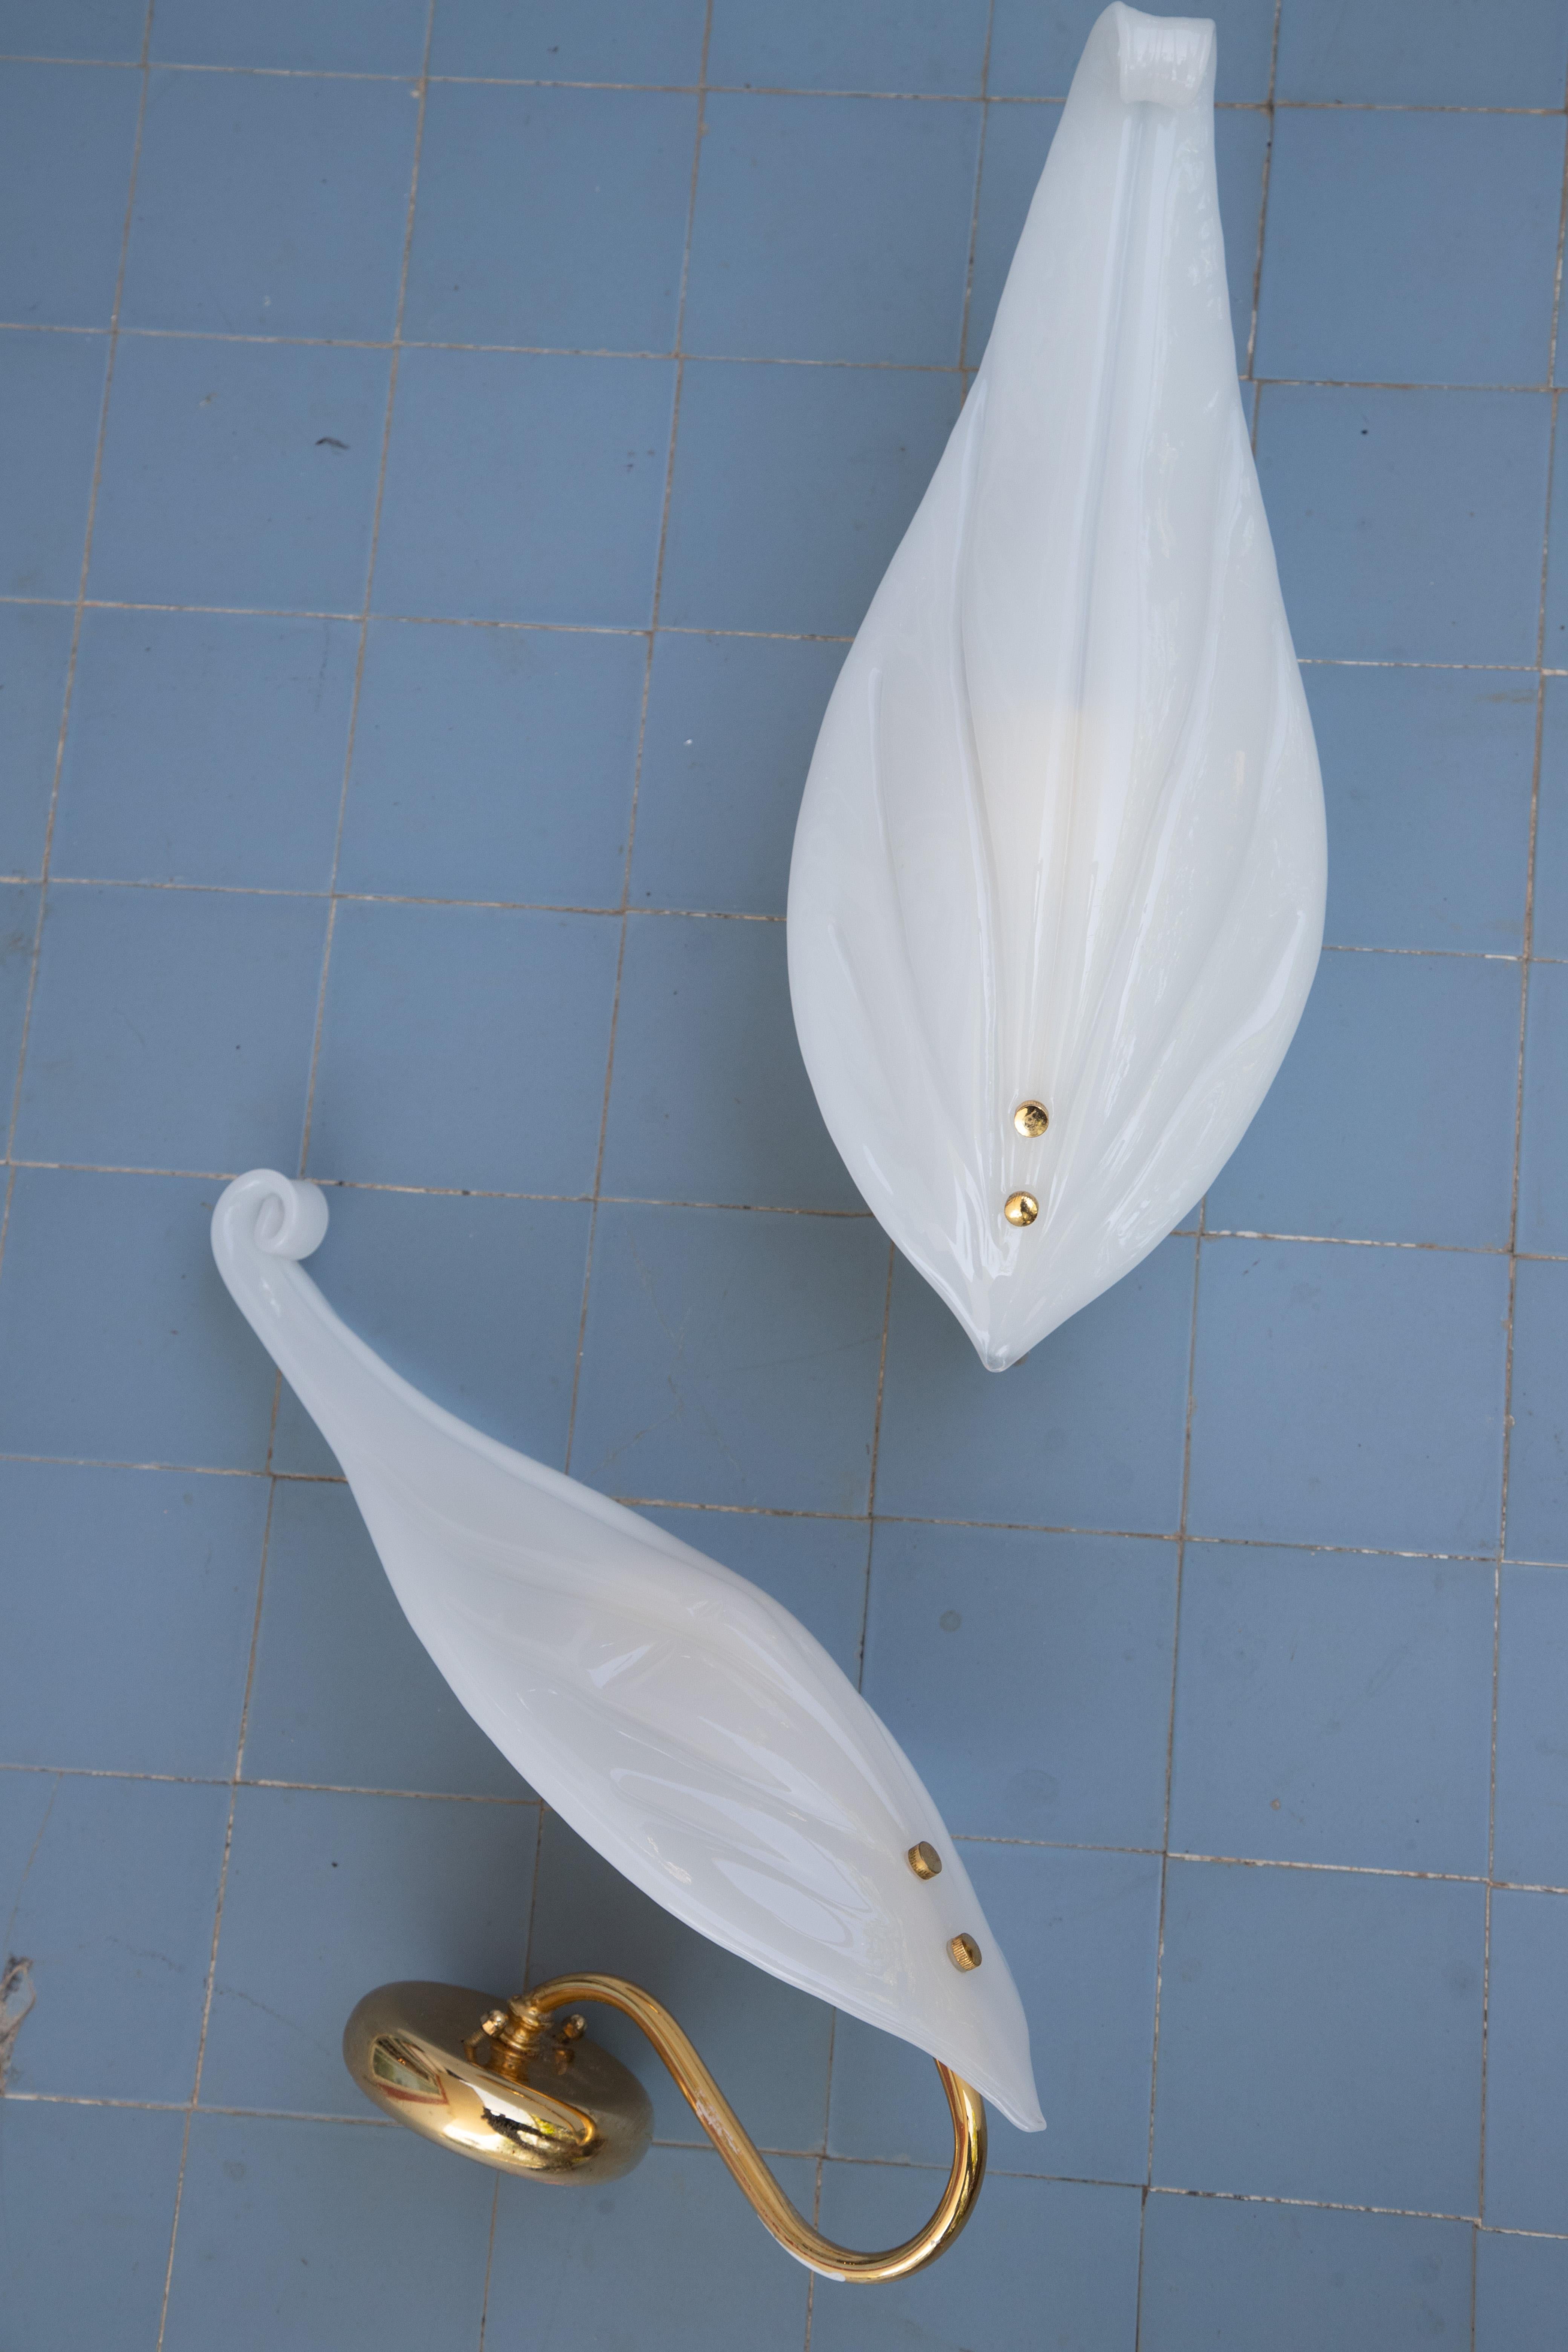 Pair of Vintage Italian Murano Glass Wall Sconces, White, 1970 For Sale 7